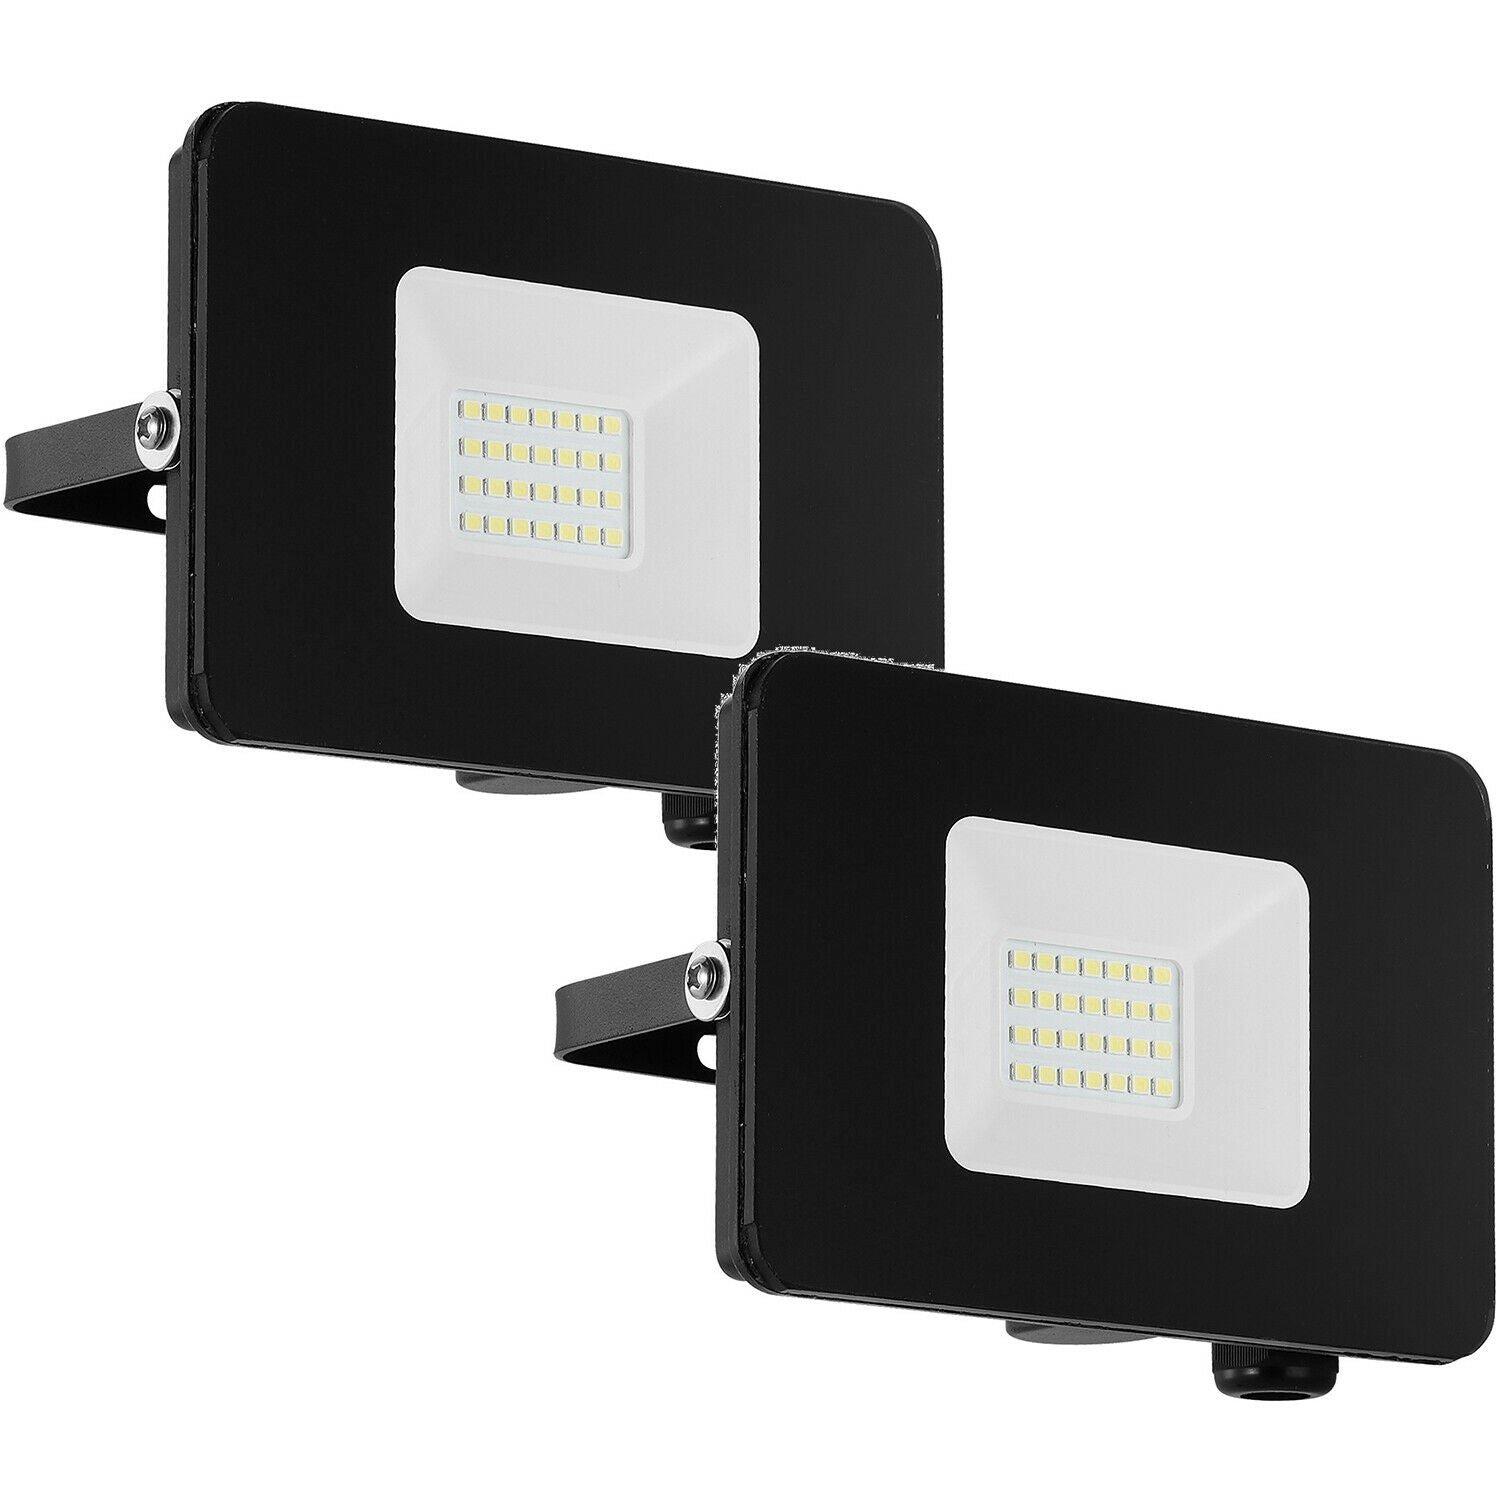 2 PACK IP65 Outdoor Wall Flood Light Black Adjustable 20W LED Porch Lamp